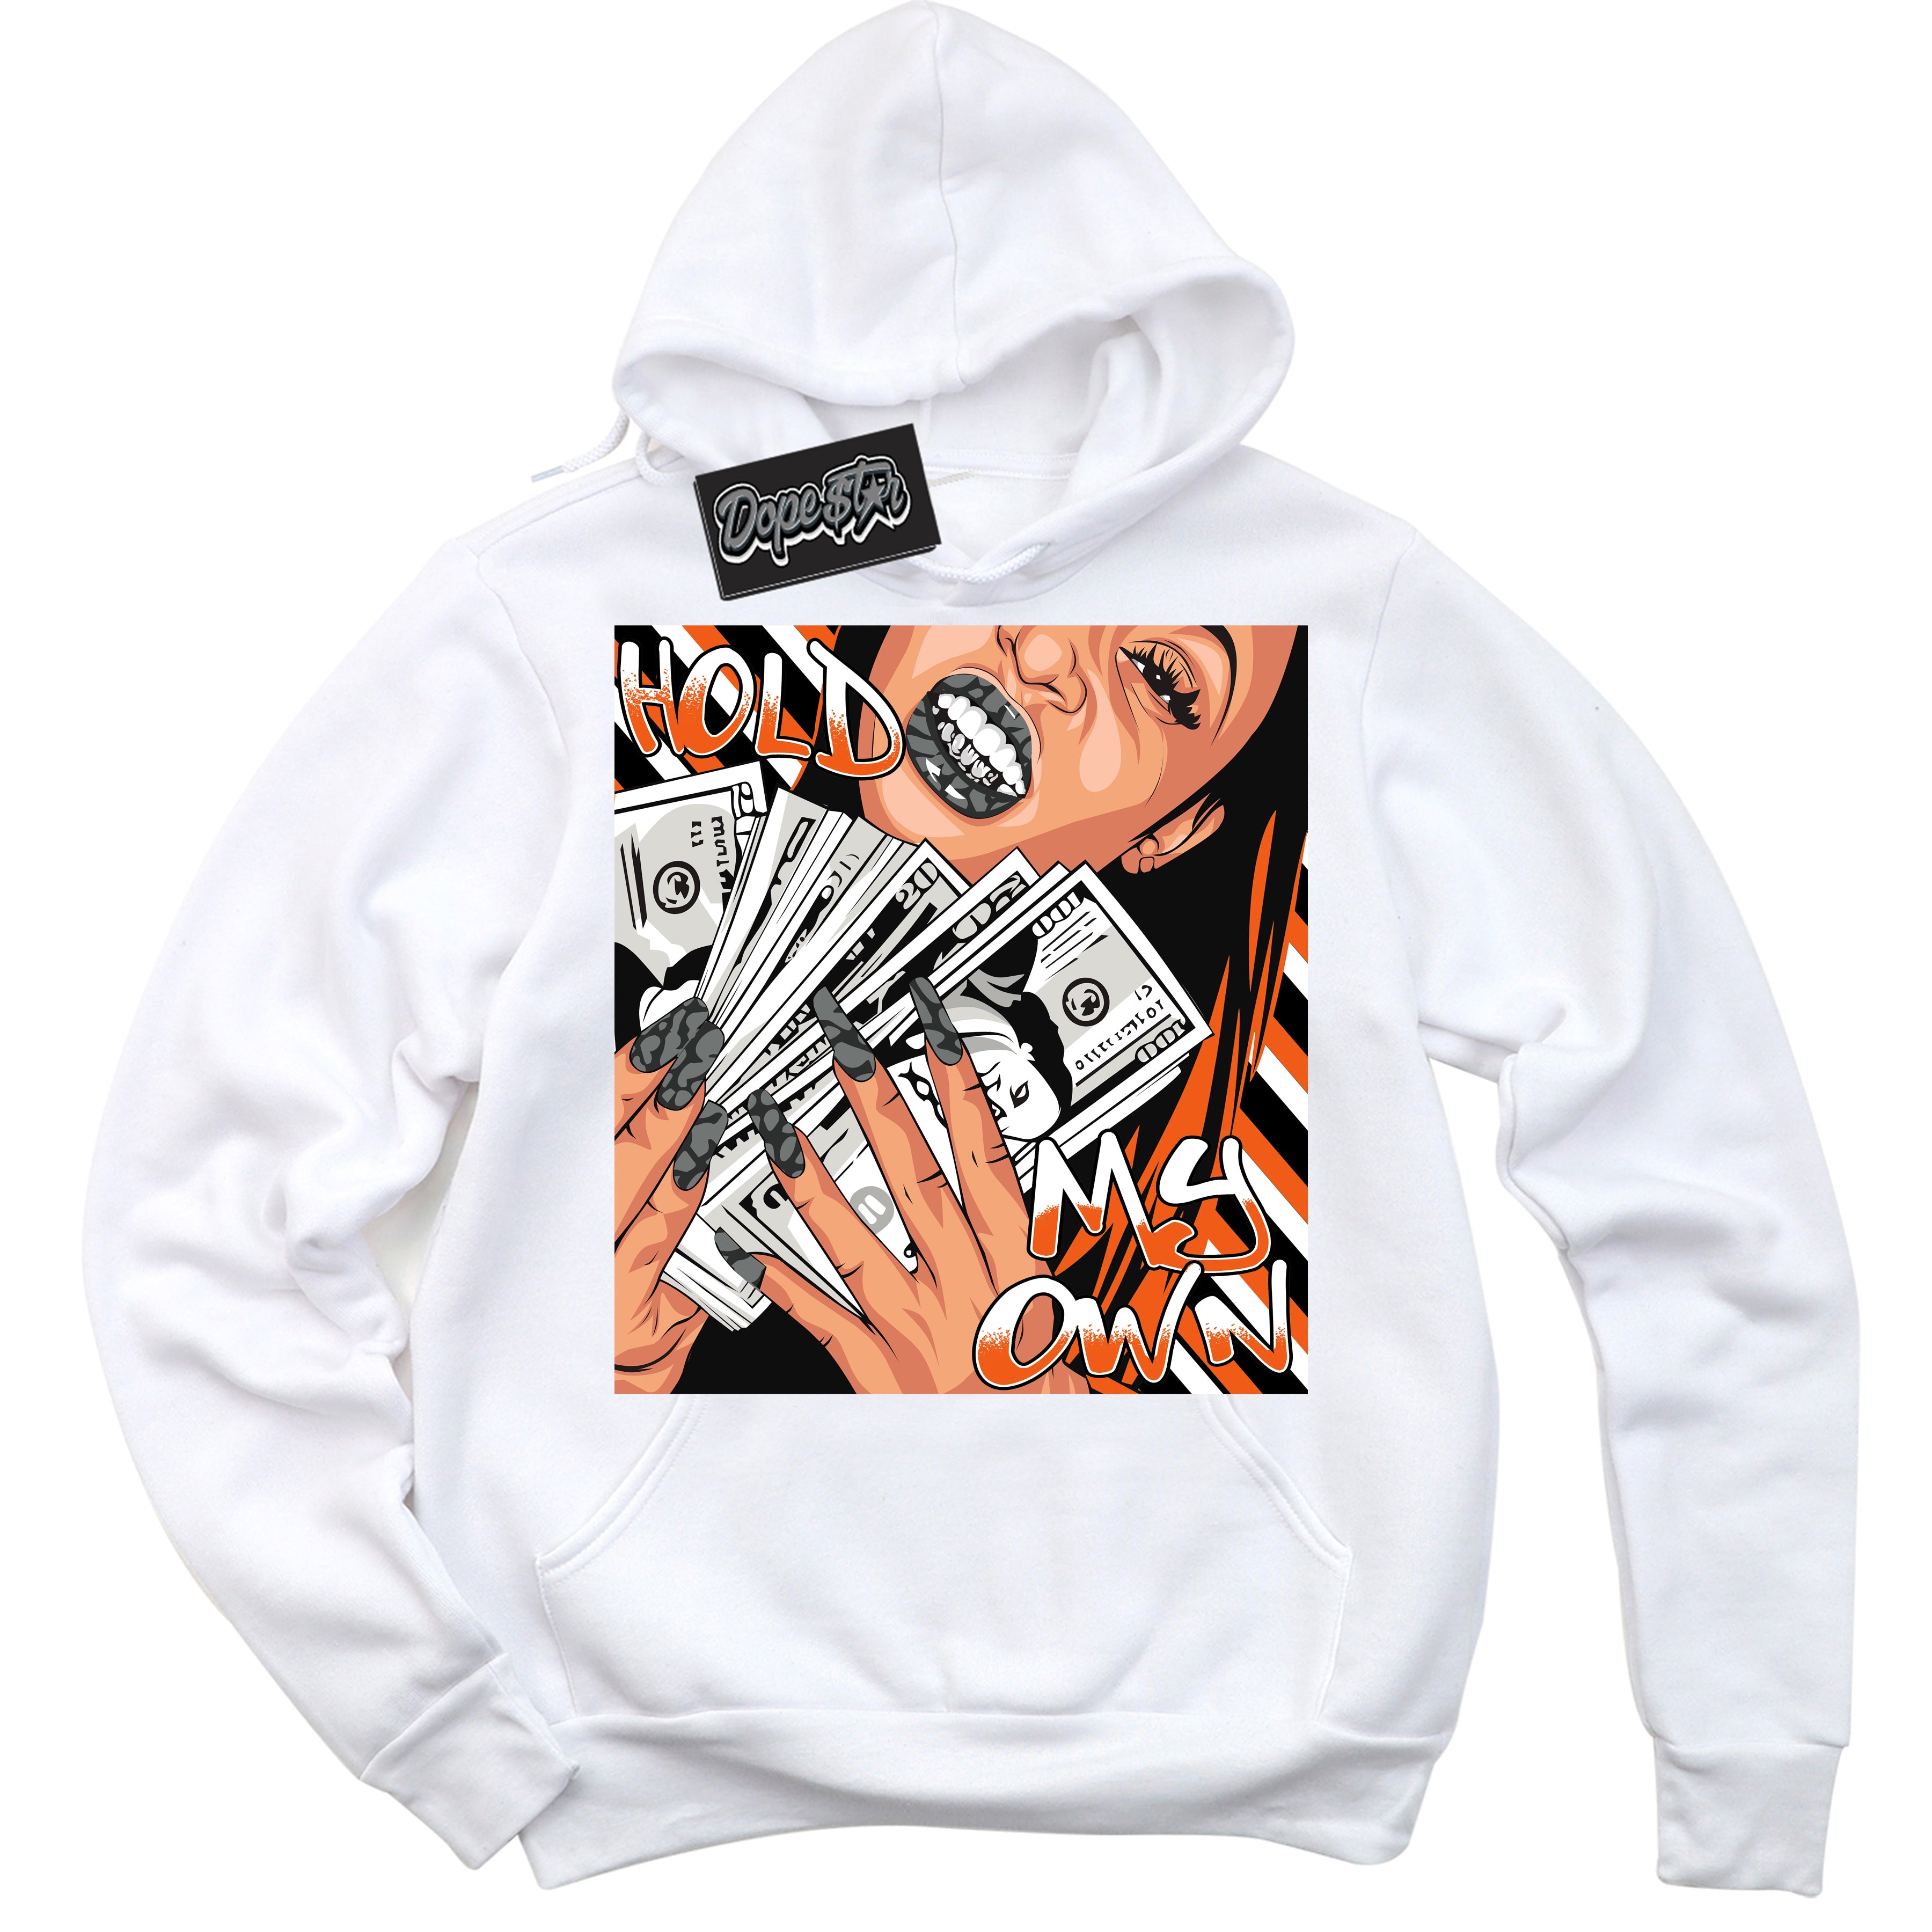 Cool White Graphic DopeStar Hoodie with “  Hold My Own “ print, that perfectly matches Fear Pack 3s sneakers